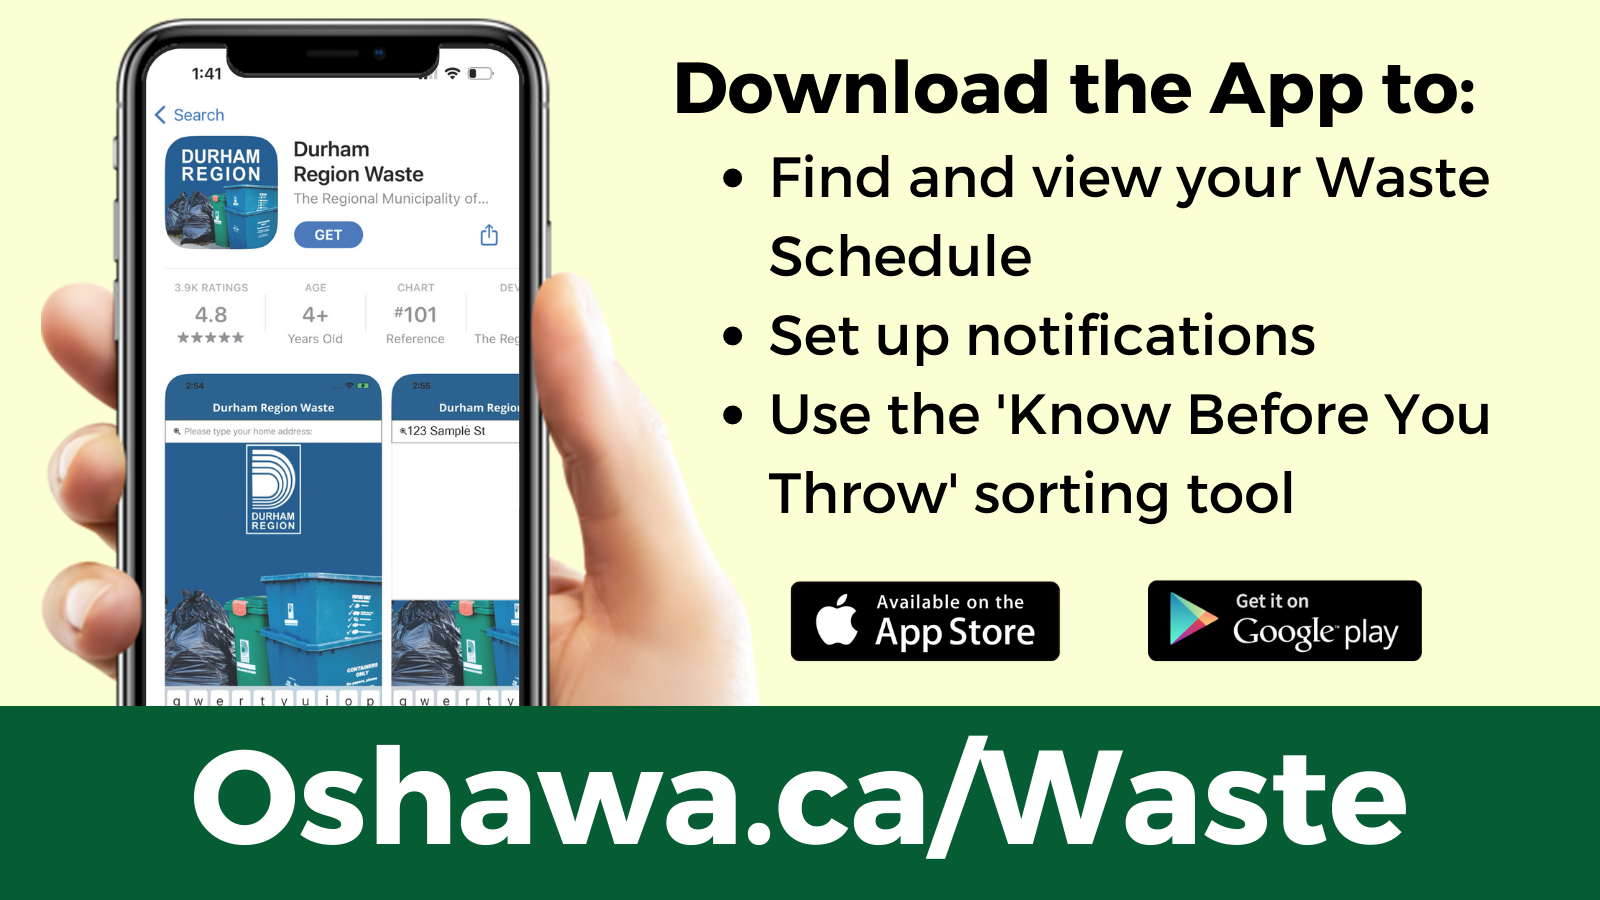 Download the App to: Find and view your Waste Schedule Set up notifications Use the 'Know Before You Throw' sorting tool